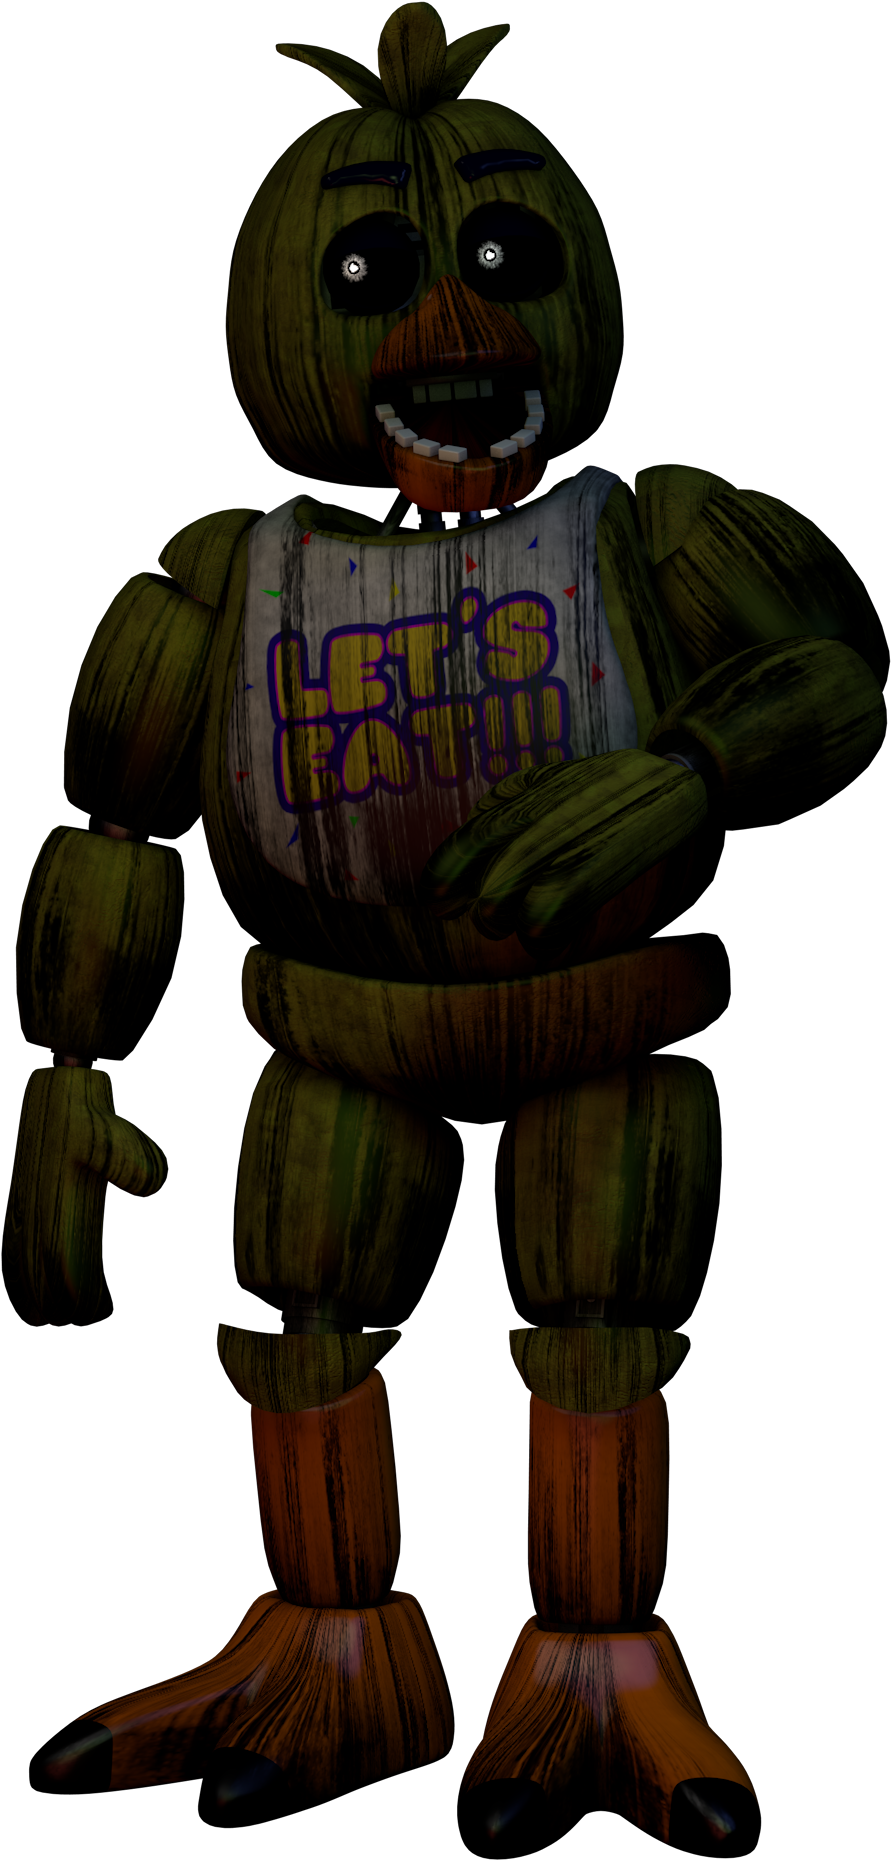 What Do You Think By Gabocoart - Five Nights At Freddy's (2560x1920)